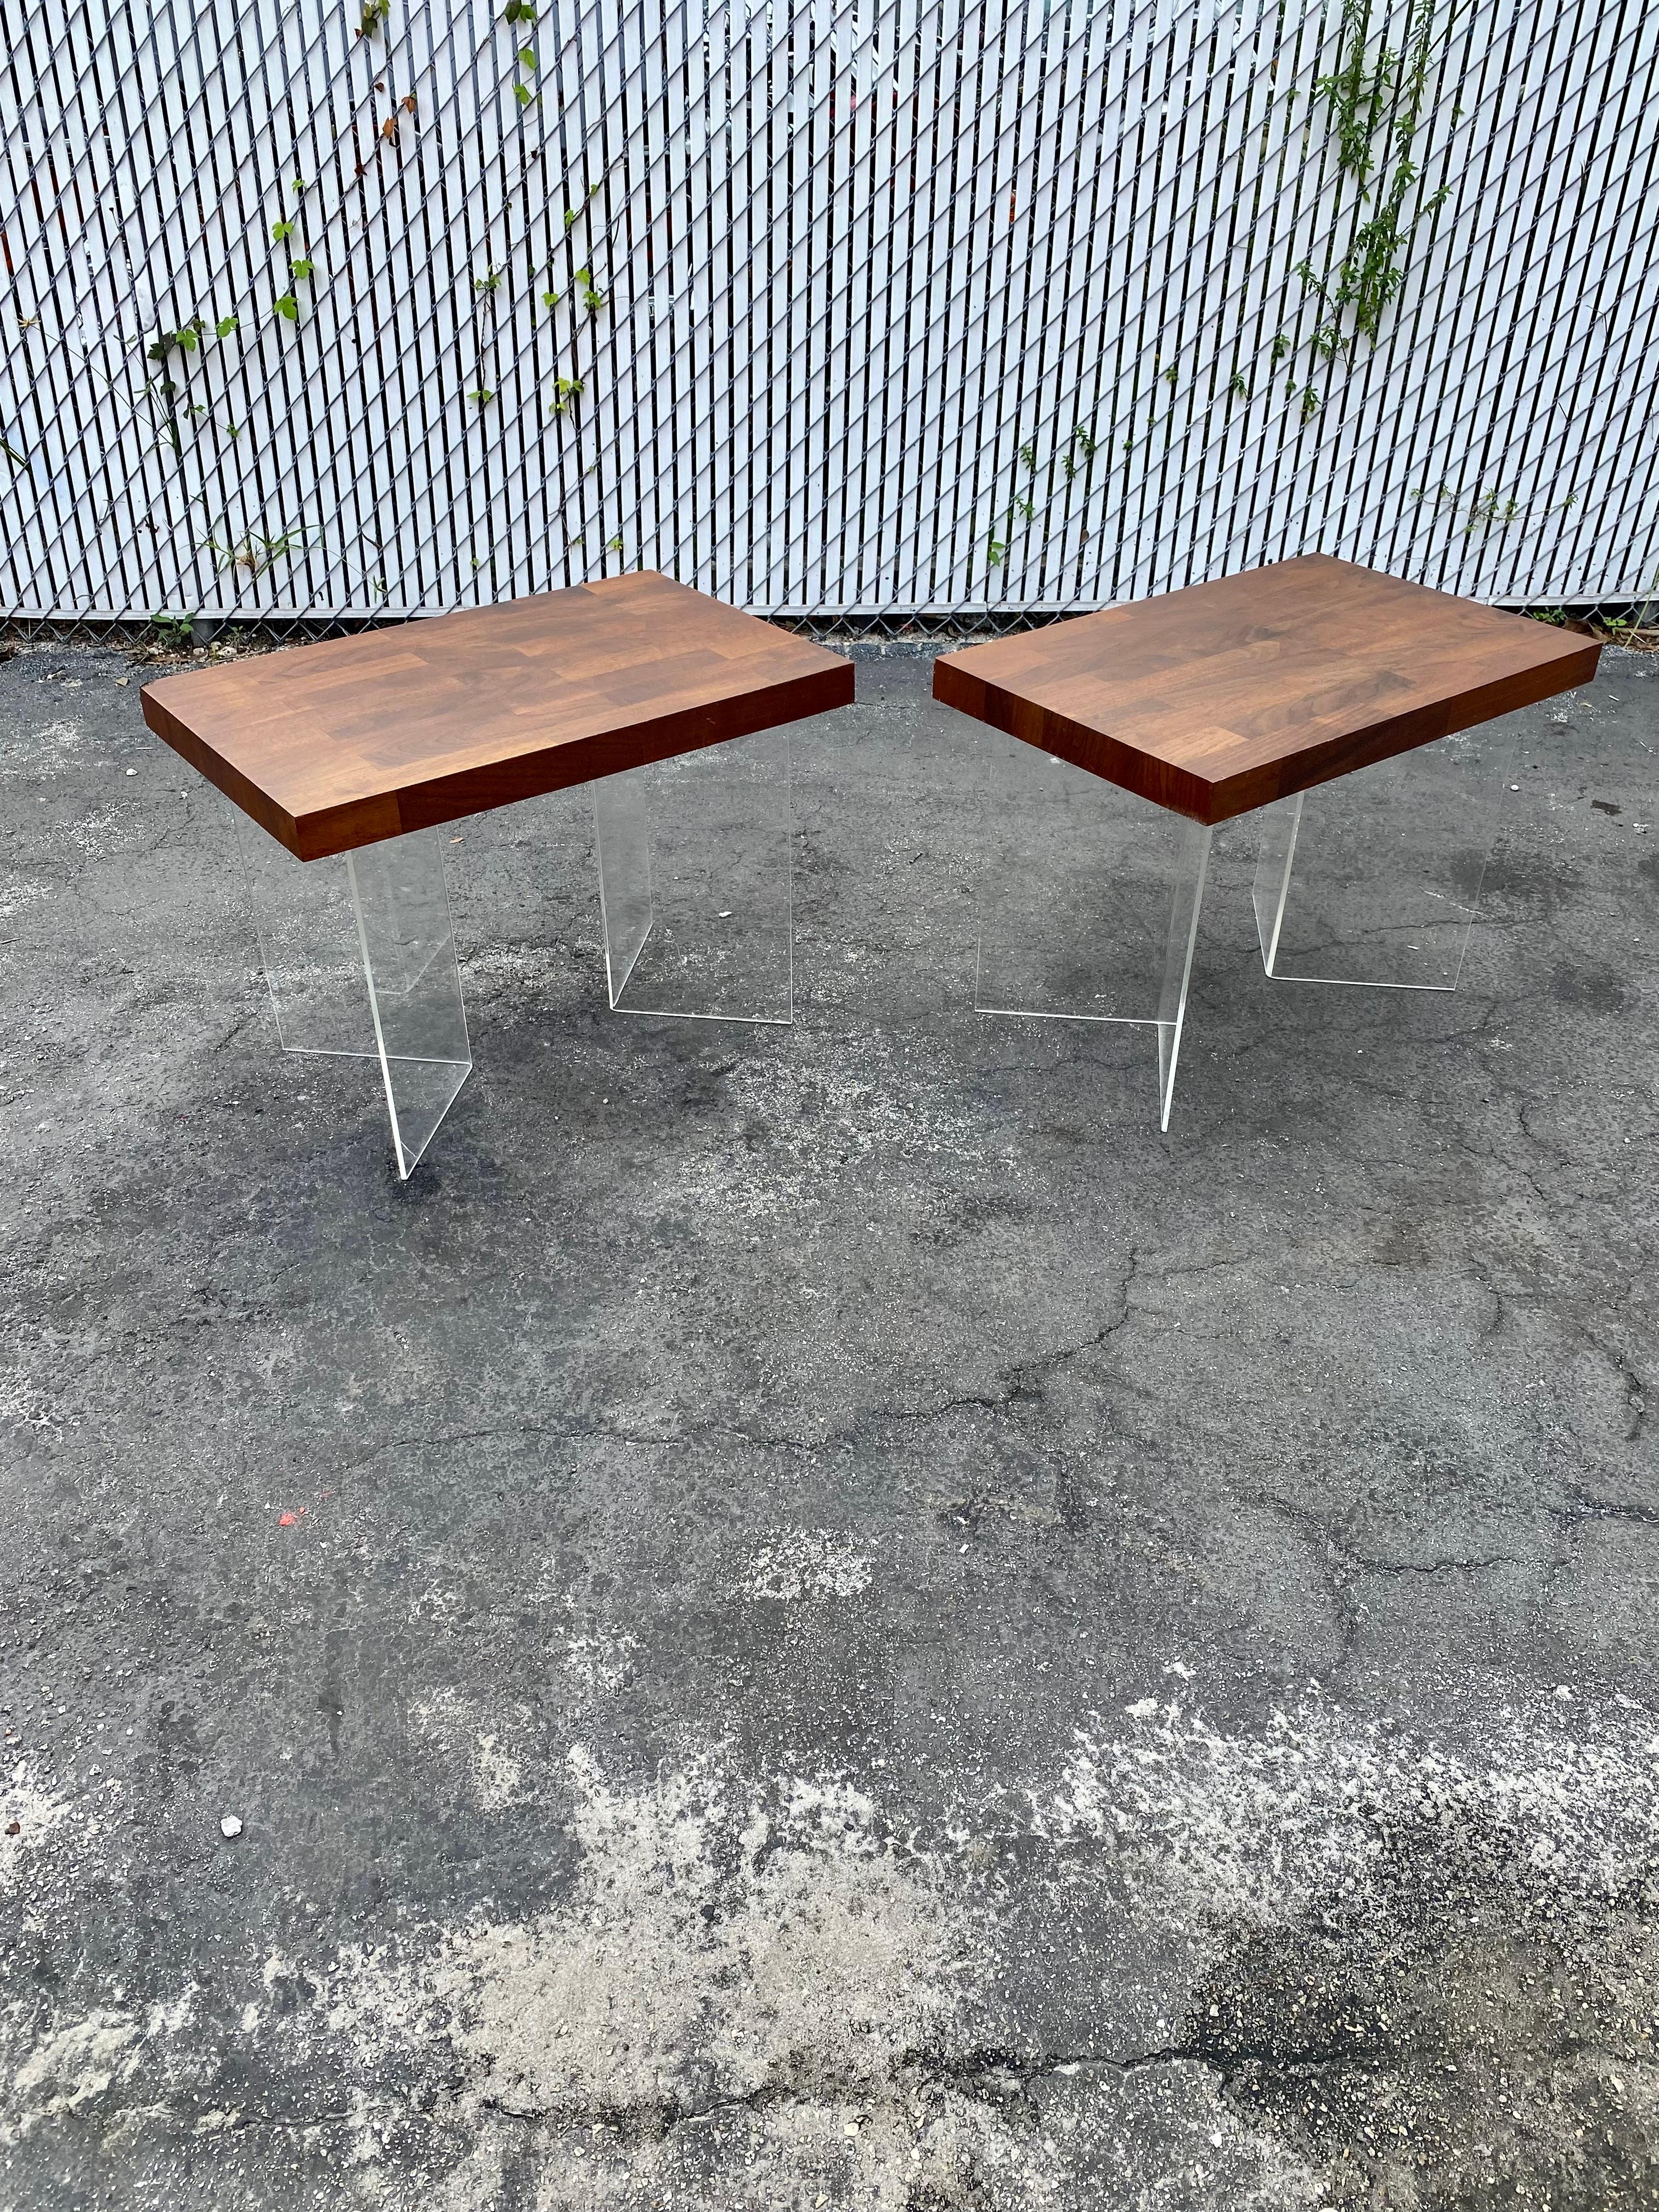 1970s Milo Baughman Floating Lucite and Wood Tables, Set of 2 In Good Condition For Sale In Fort Lauderdale, FL